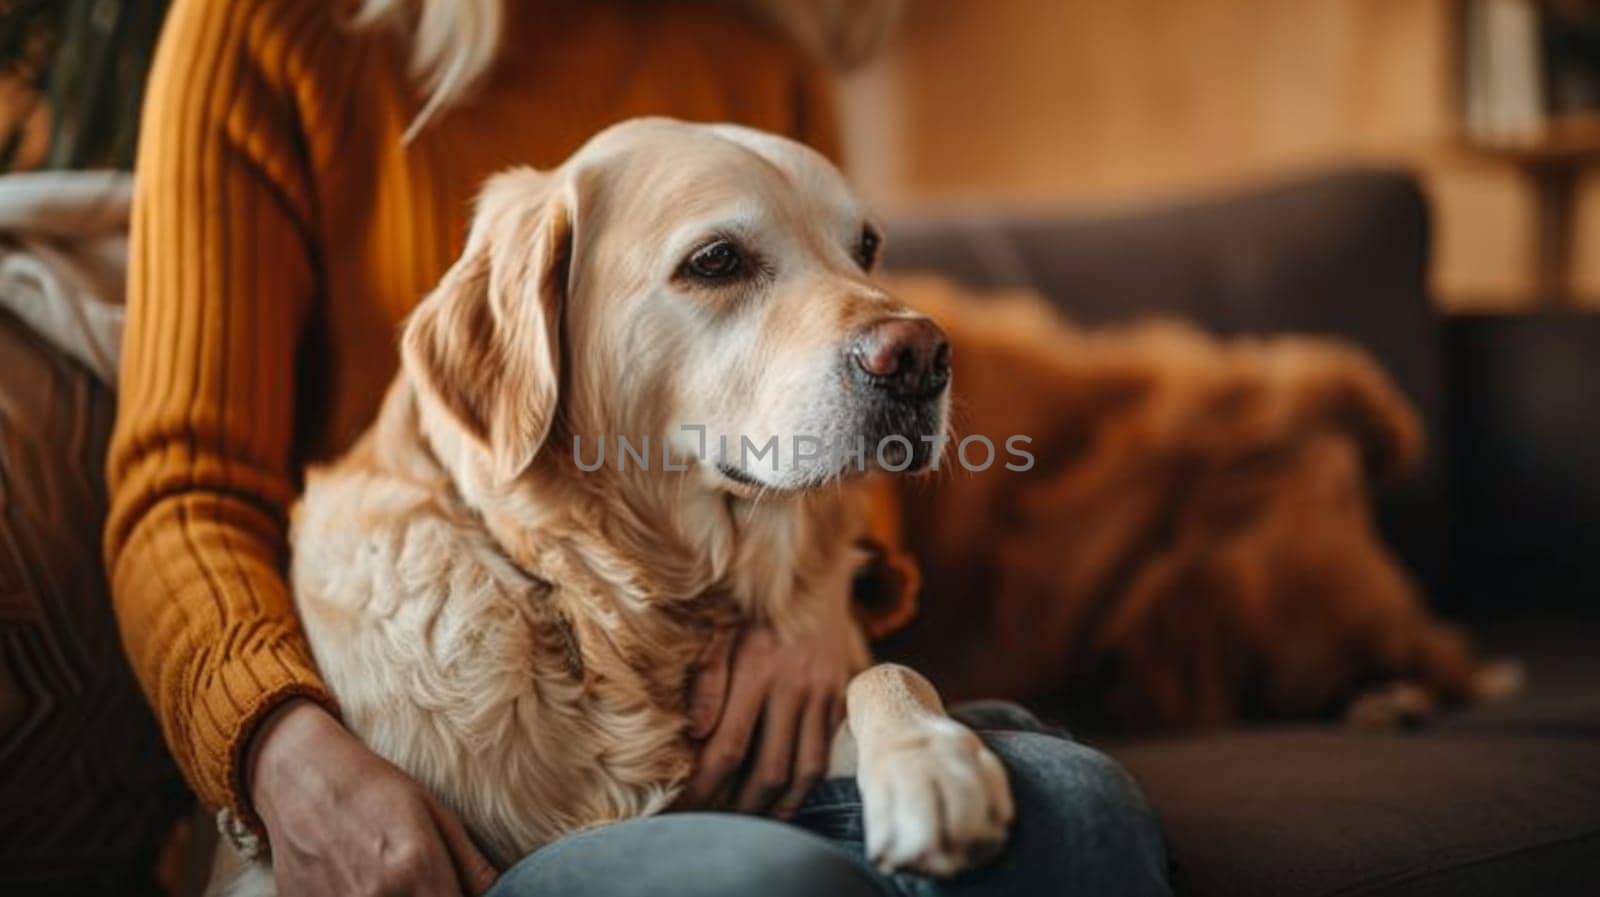 A woman sitting on a couch with her dog in her lap, AI by starush